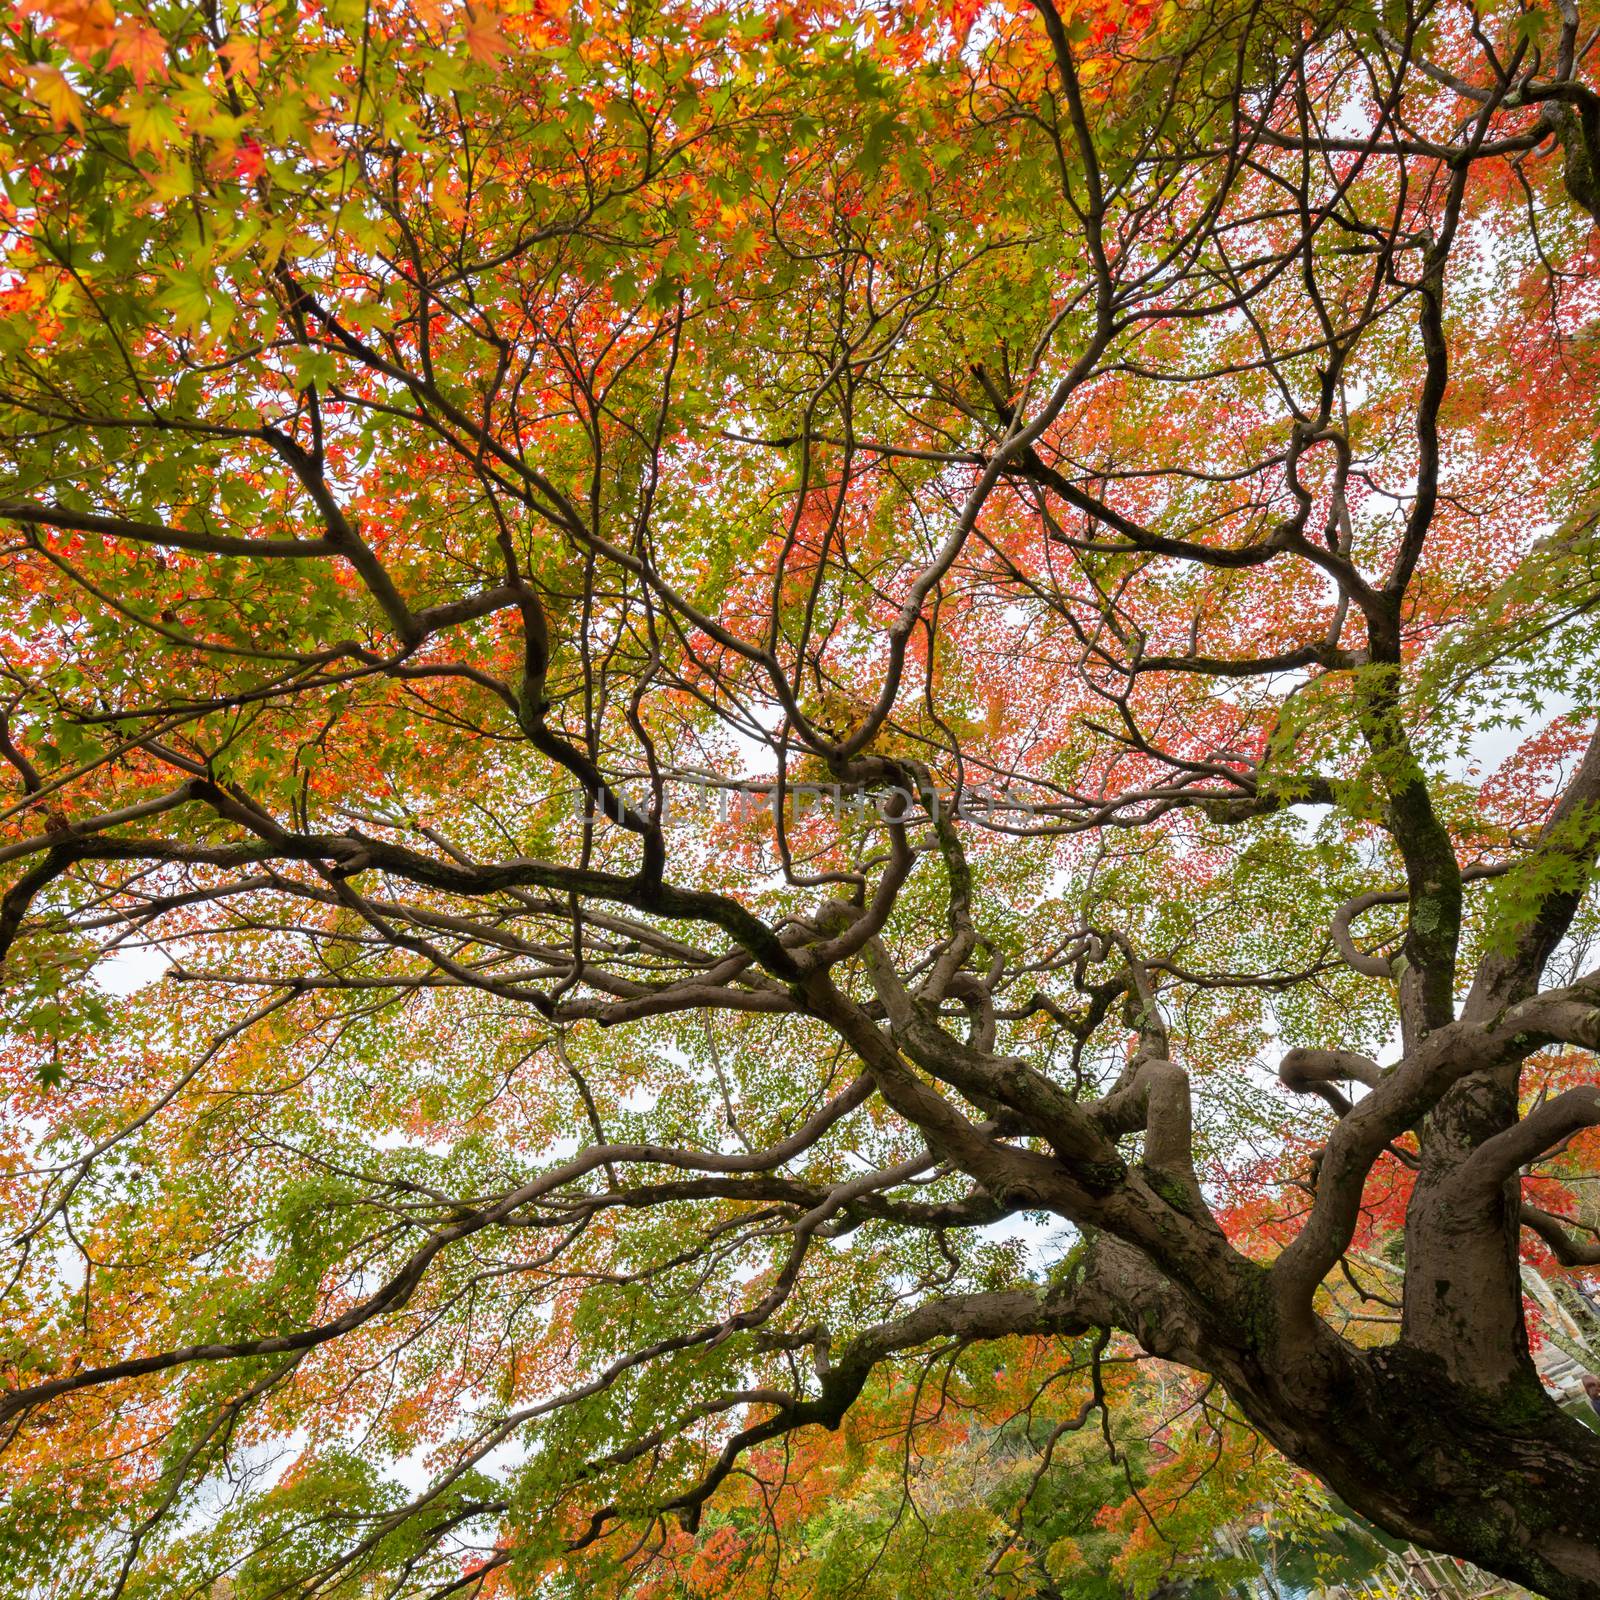 Colorful treetops in autumn.